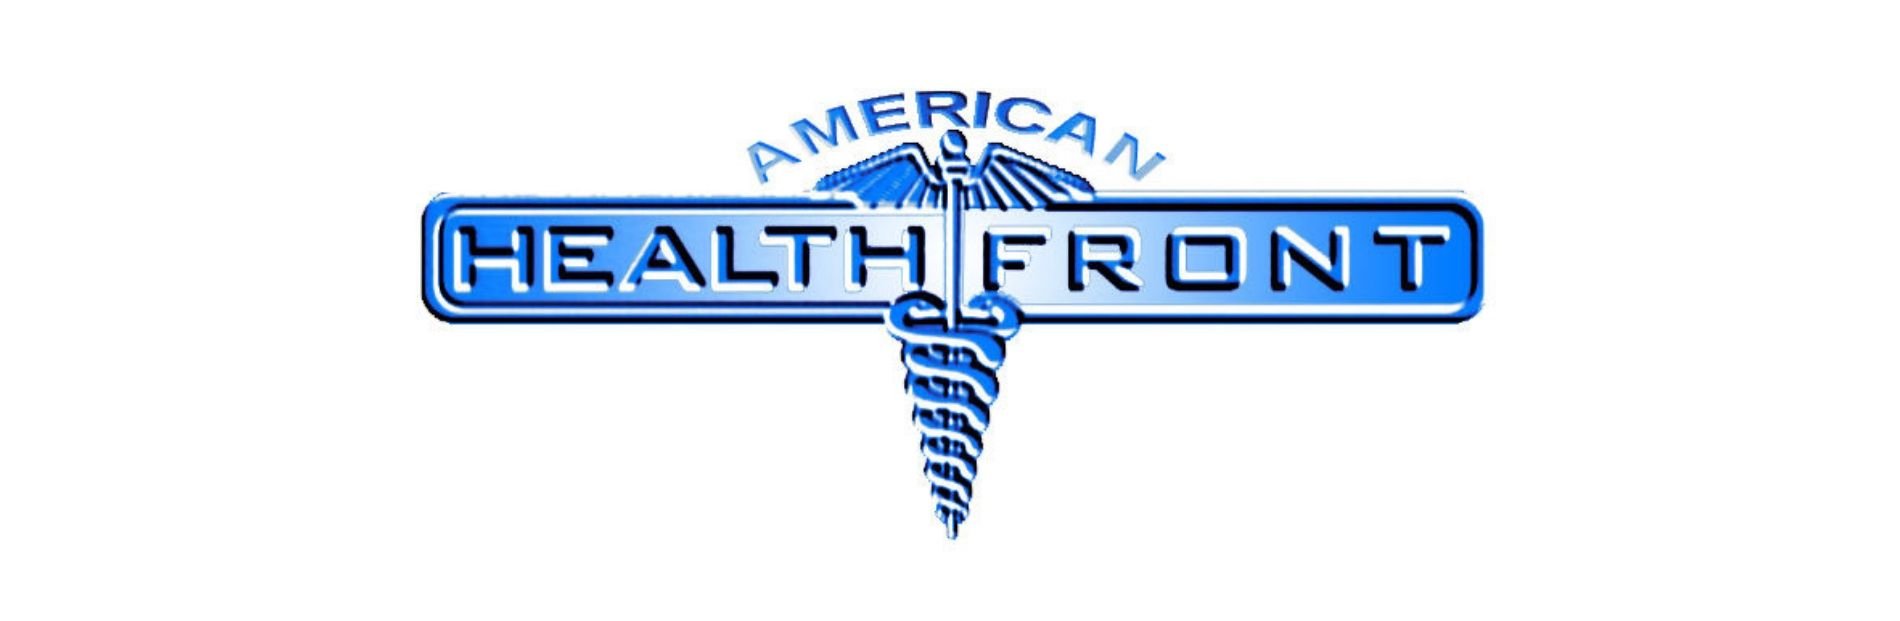 american health front